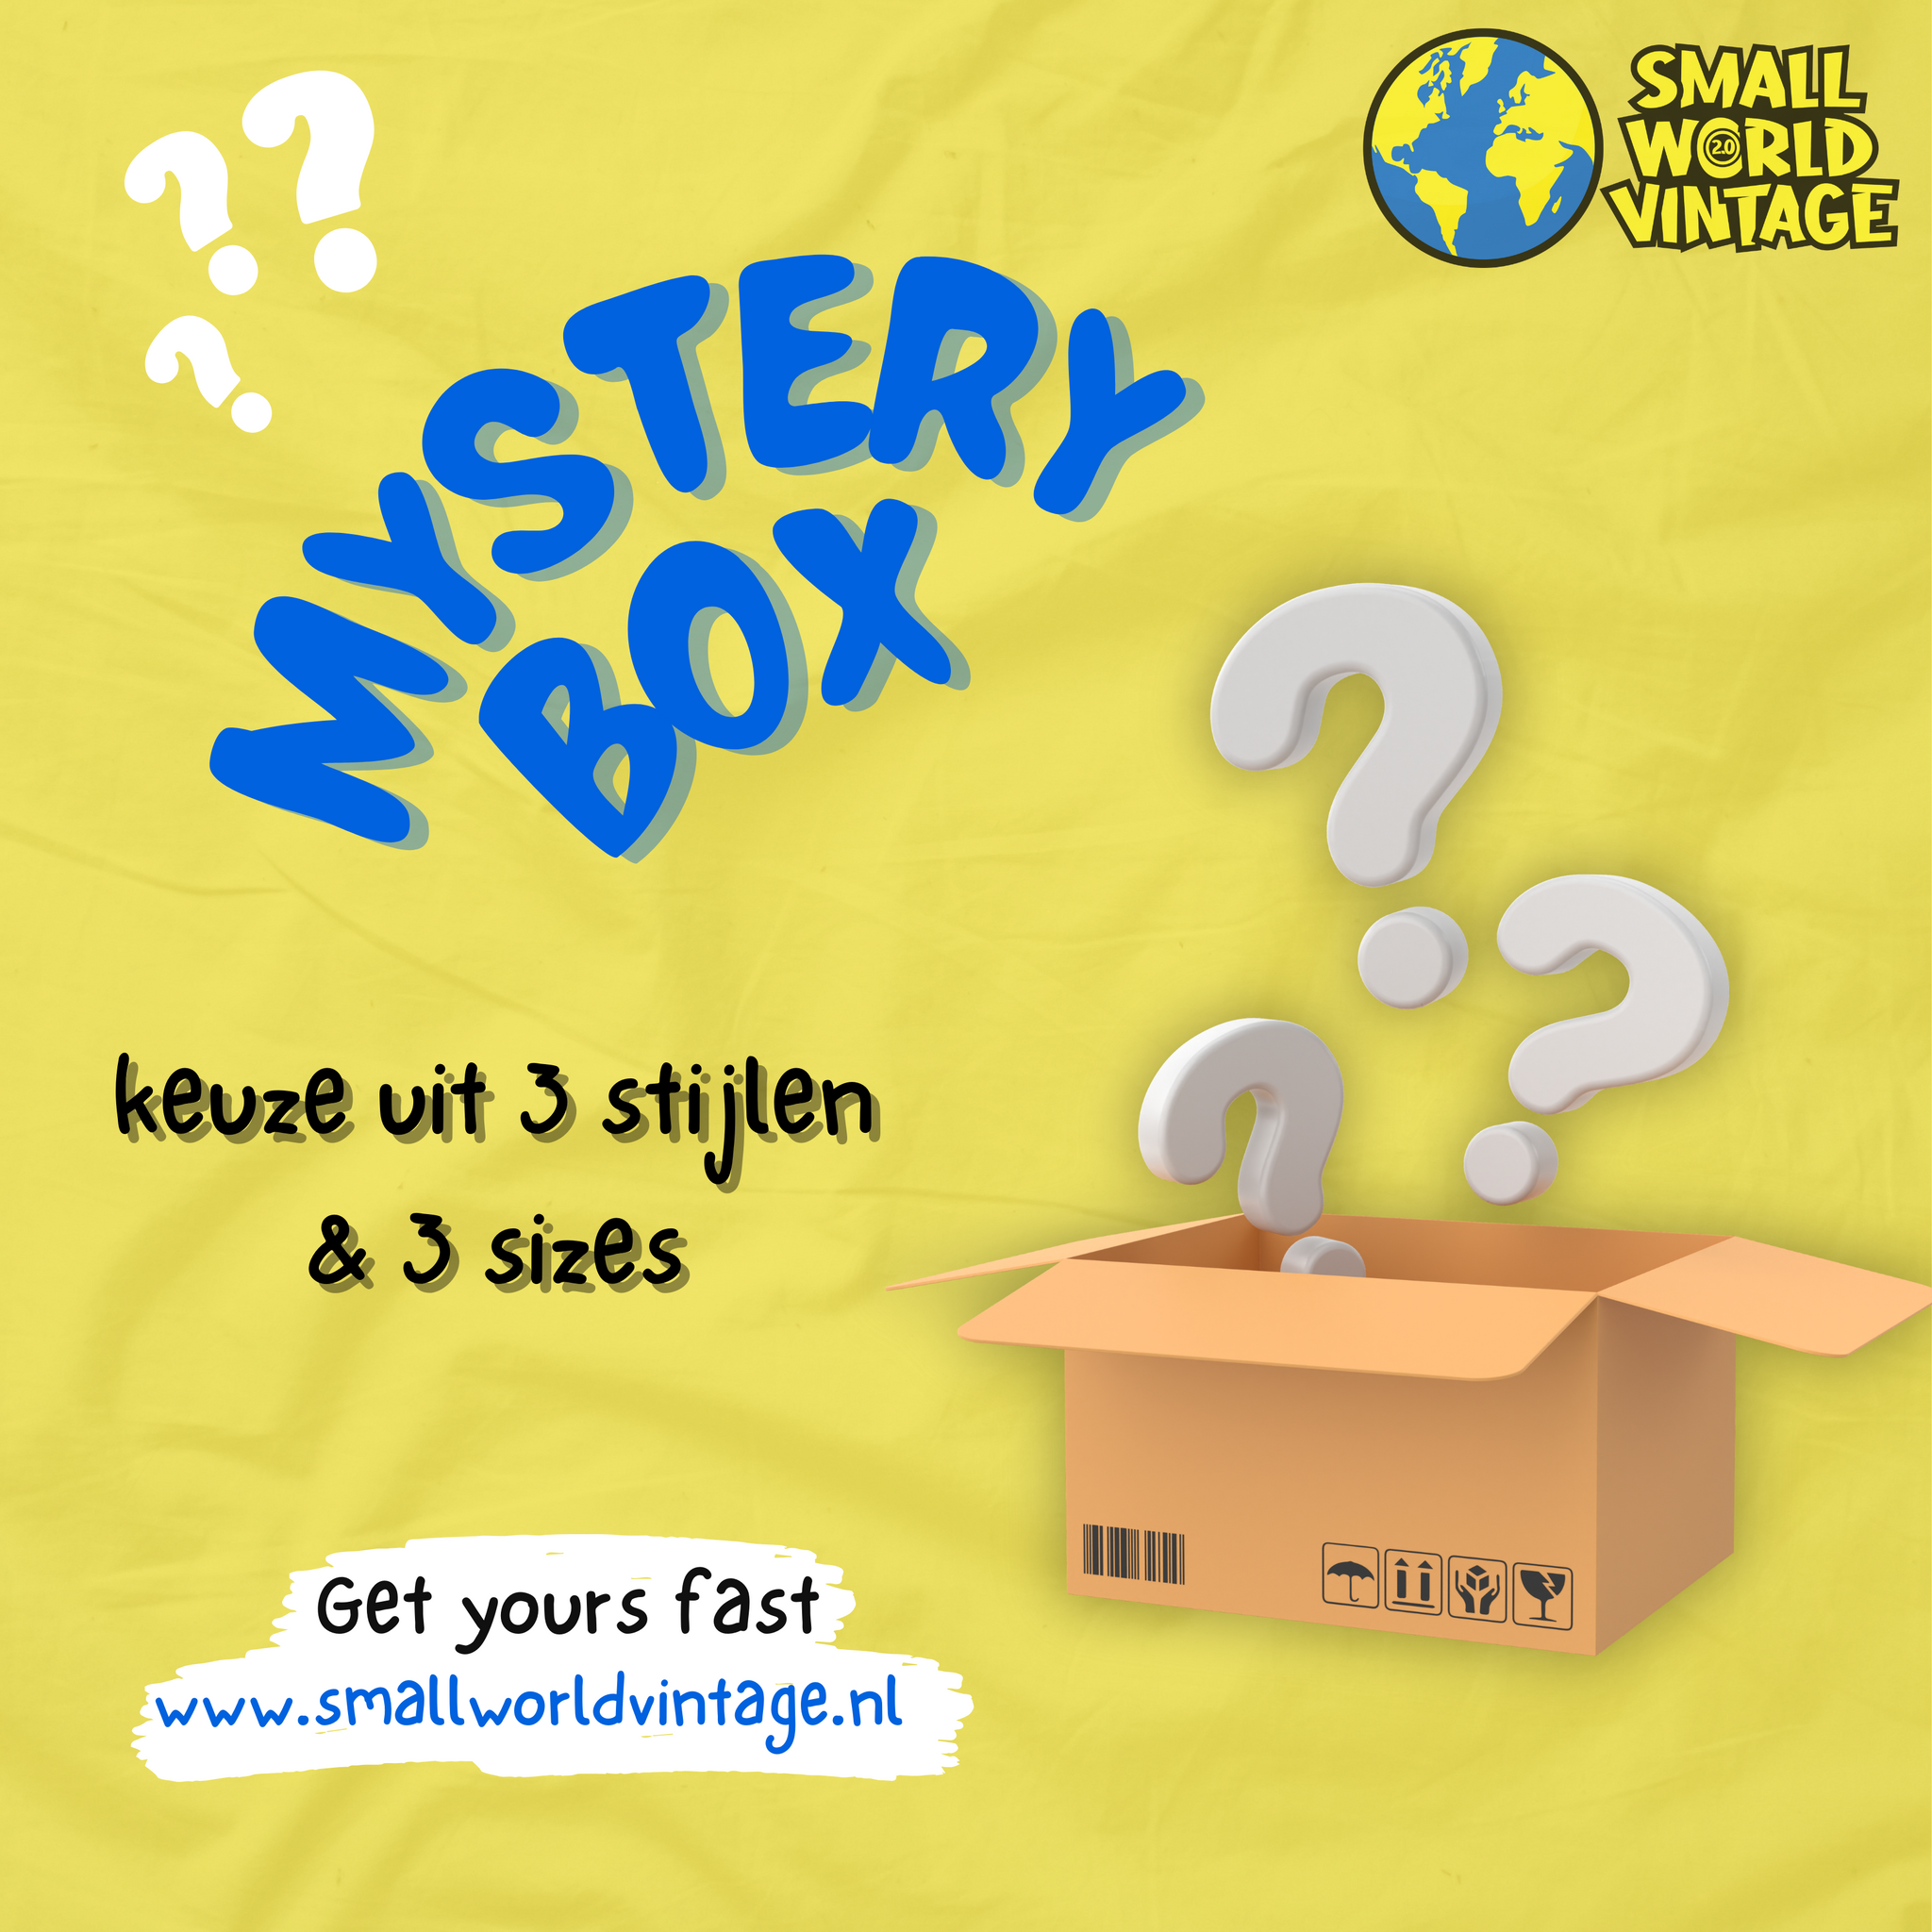 Mystery box 2: On the right track